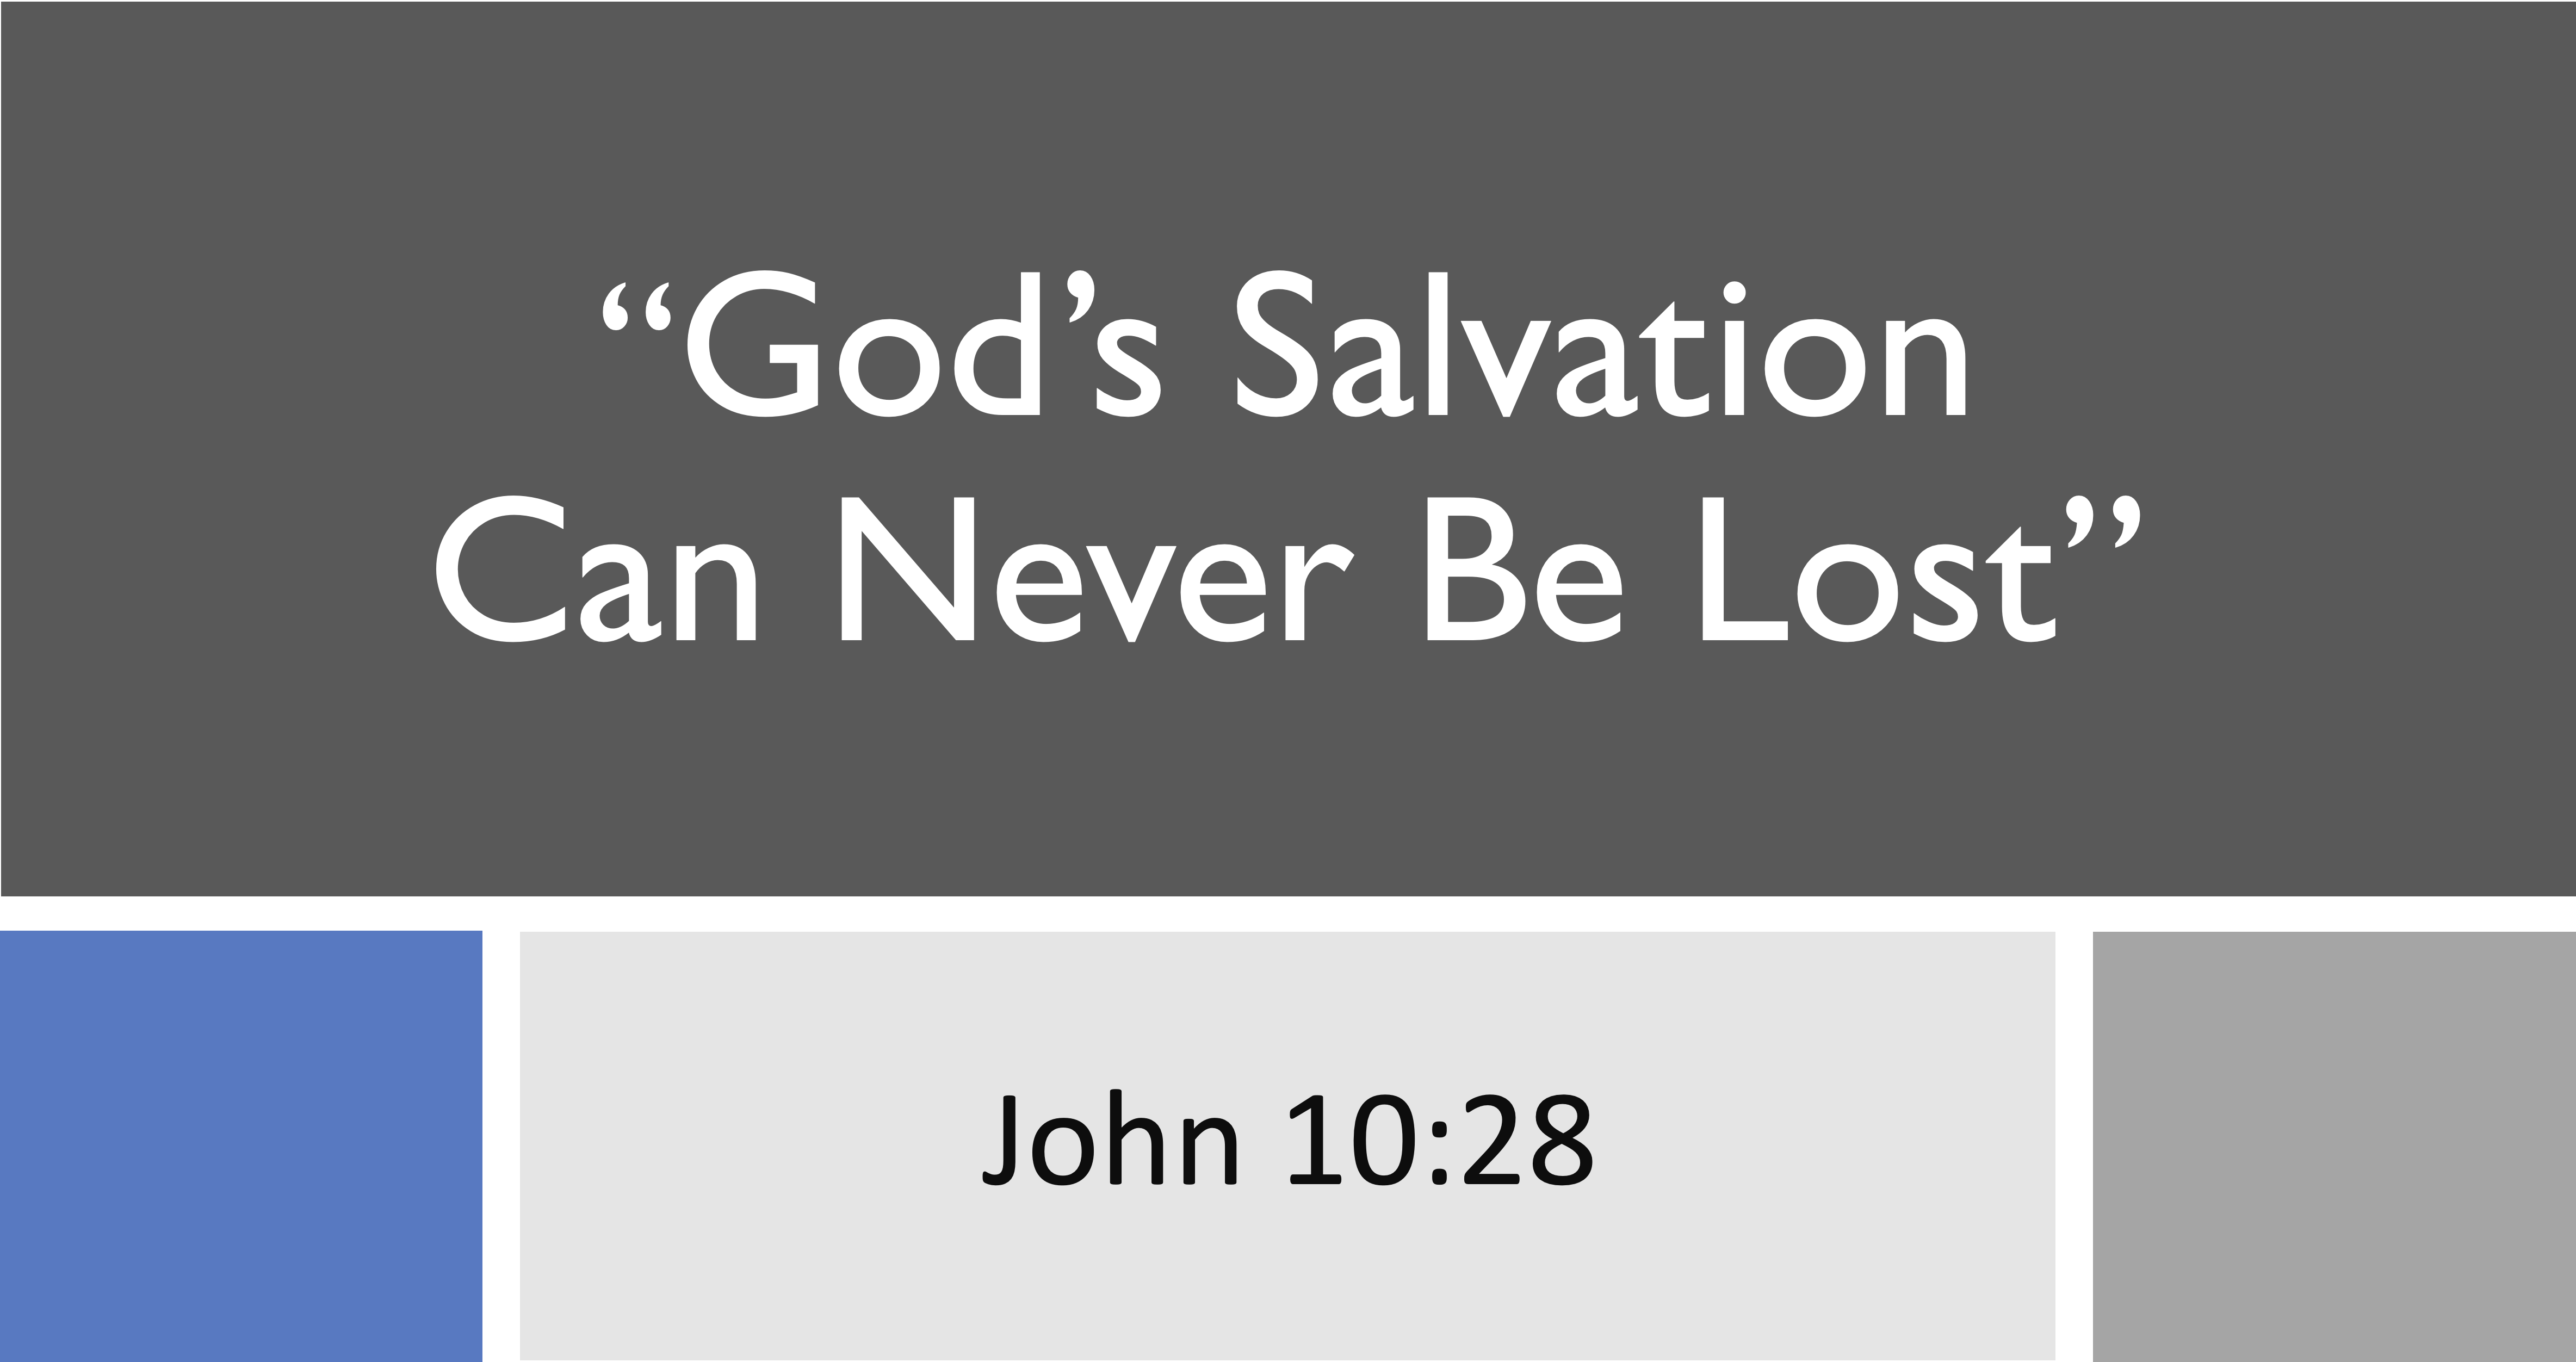 God's Salvation Can Never Be Lost